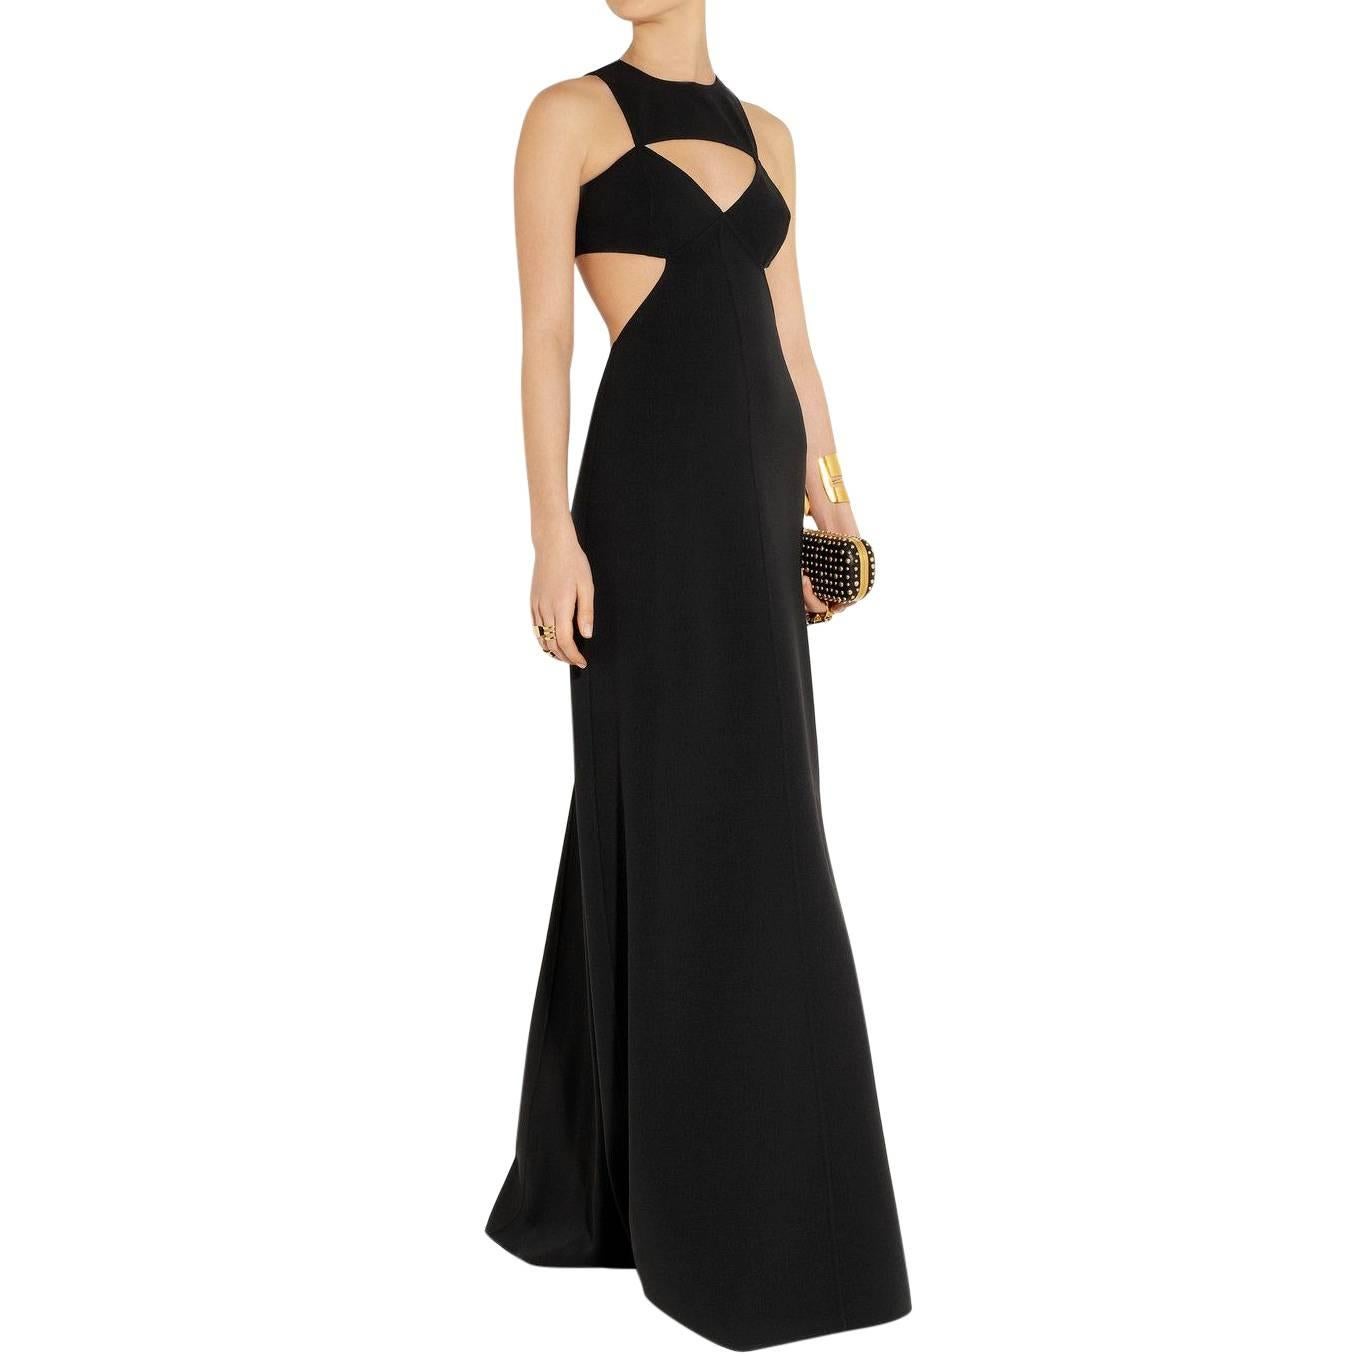 Michael Kors wool cut-out gown

Featuring:
-sleeveless design
-open back
-cut-out detailing
-exposed back zip fastening and concealed side fastening
-maxi length
-fitted silhouette

Condition: 9.5/10